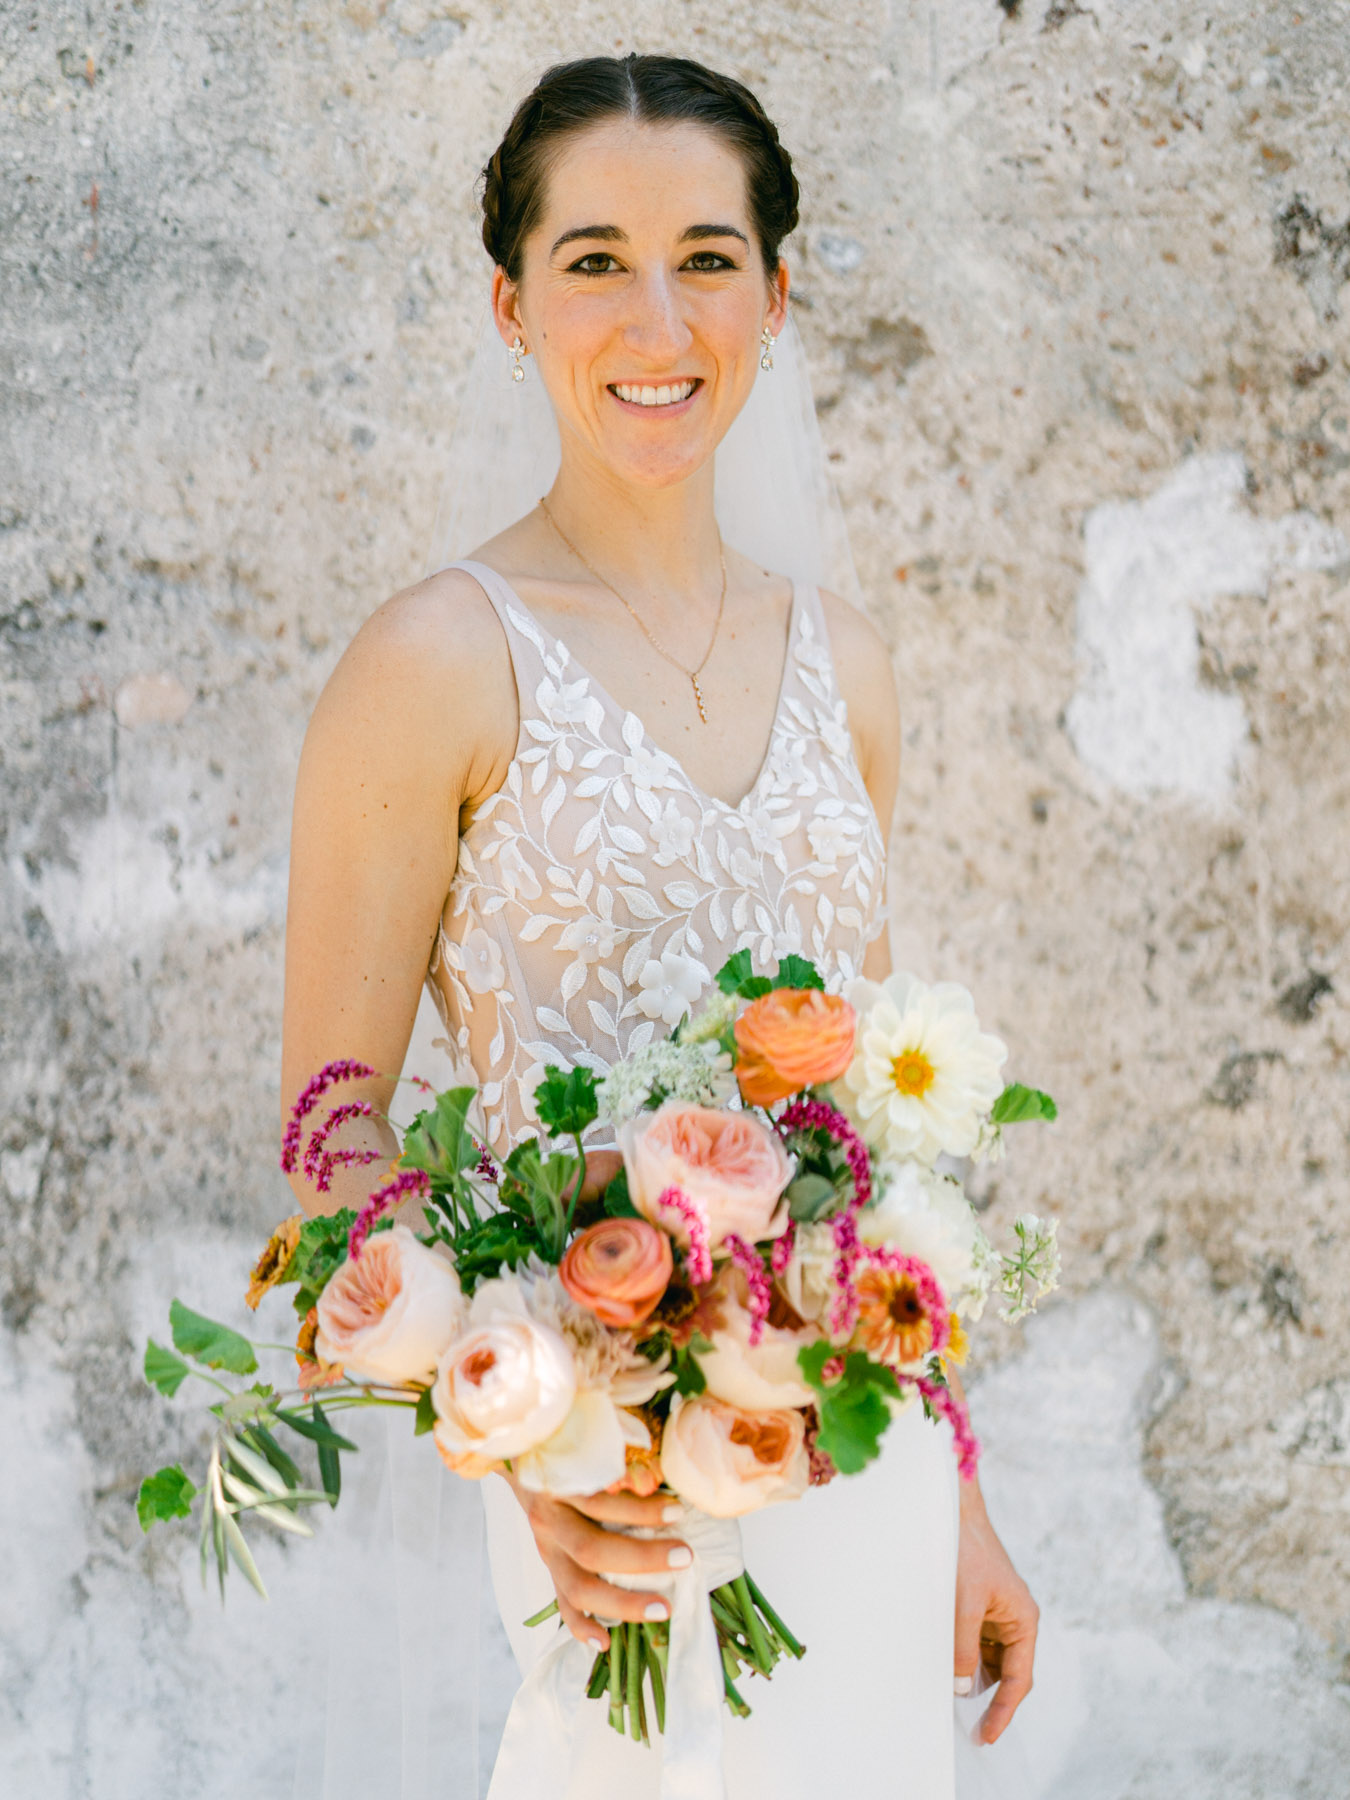 A bride with a braided updo posing with her brightly colored bouquet